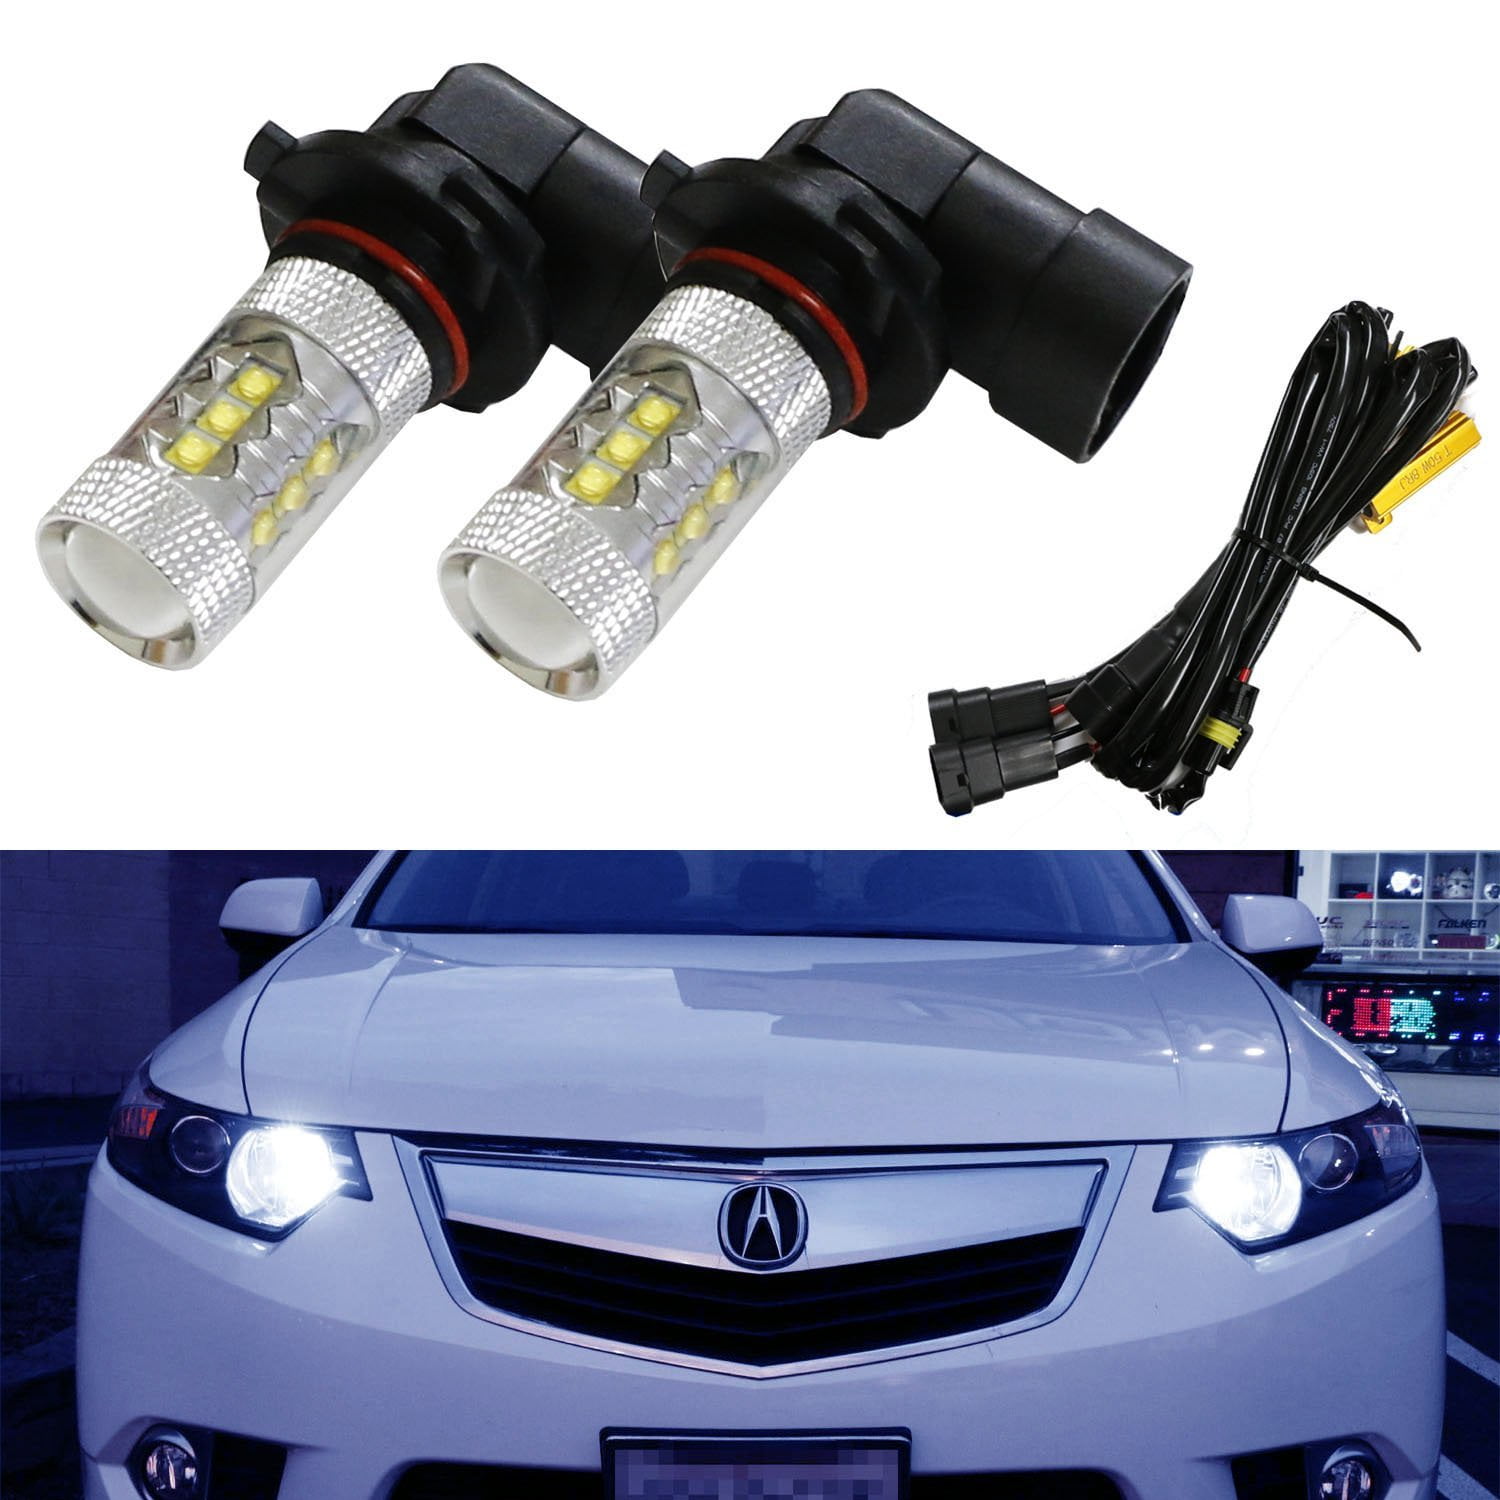 Compatible For Acura TSX RDX TL MDX Civic Accord CRZ iJDMTOY 8K Blue 80W 16-CREE 9005 LED High Beam Daytime Running Lights Kit 